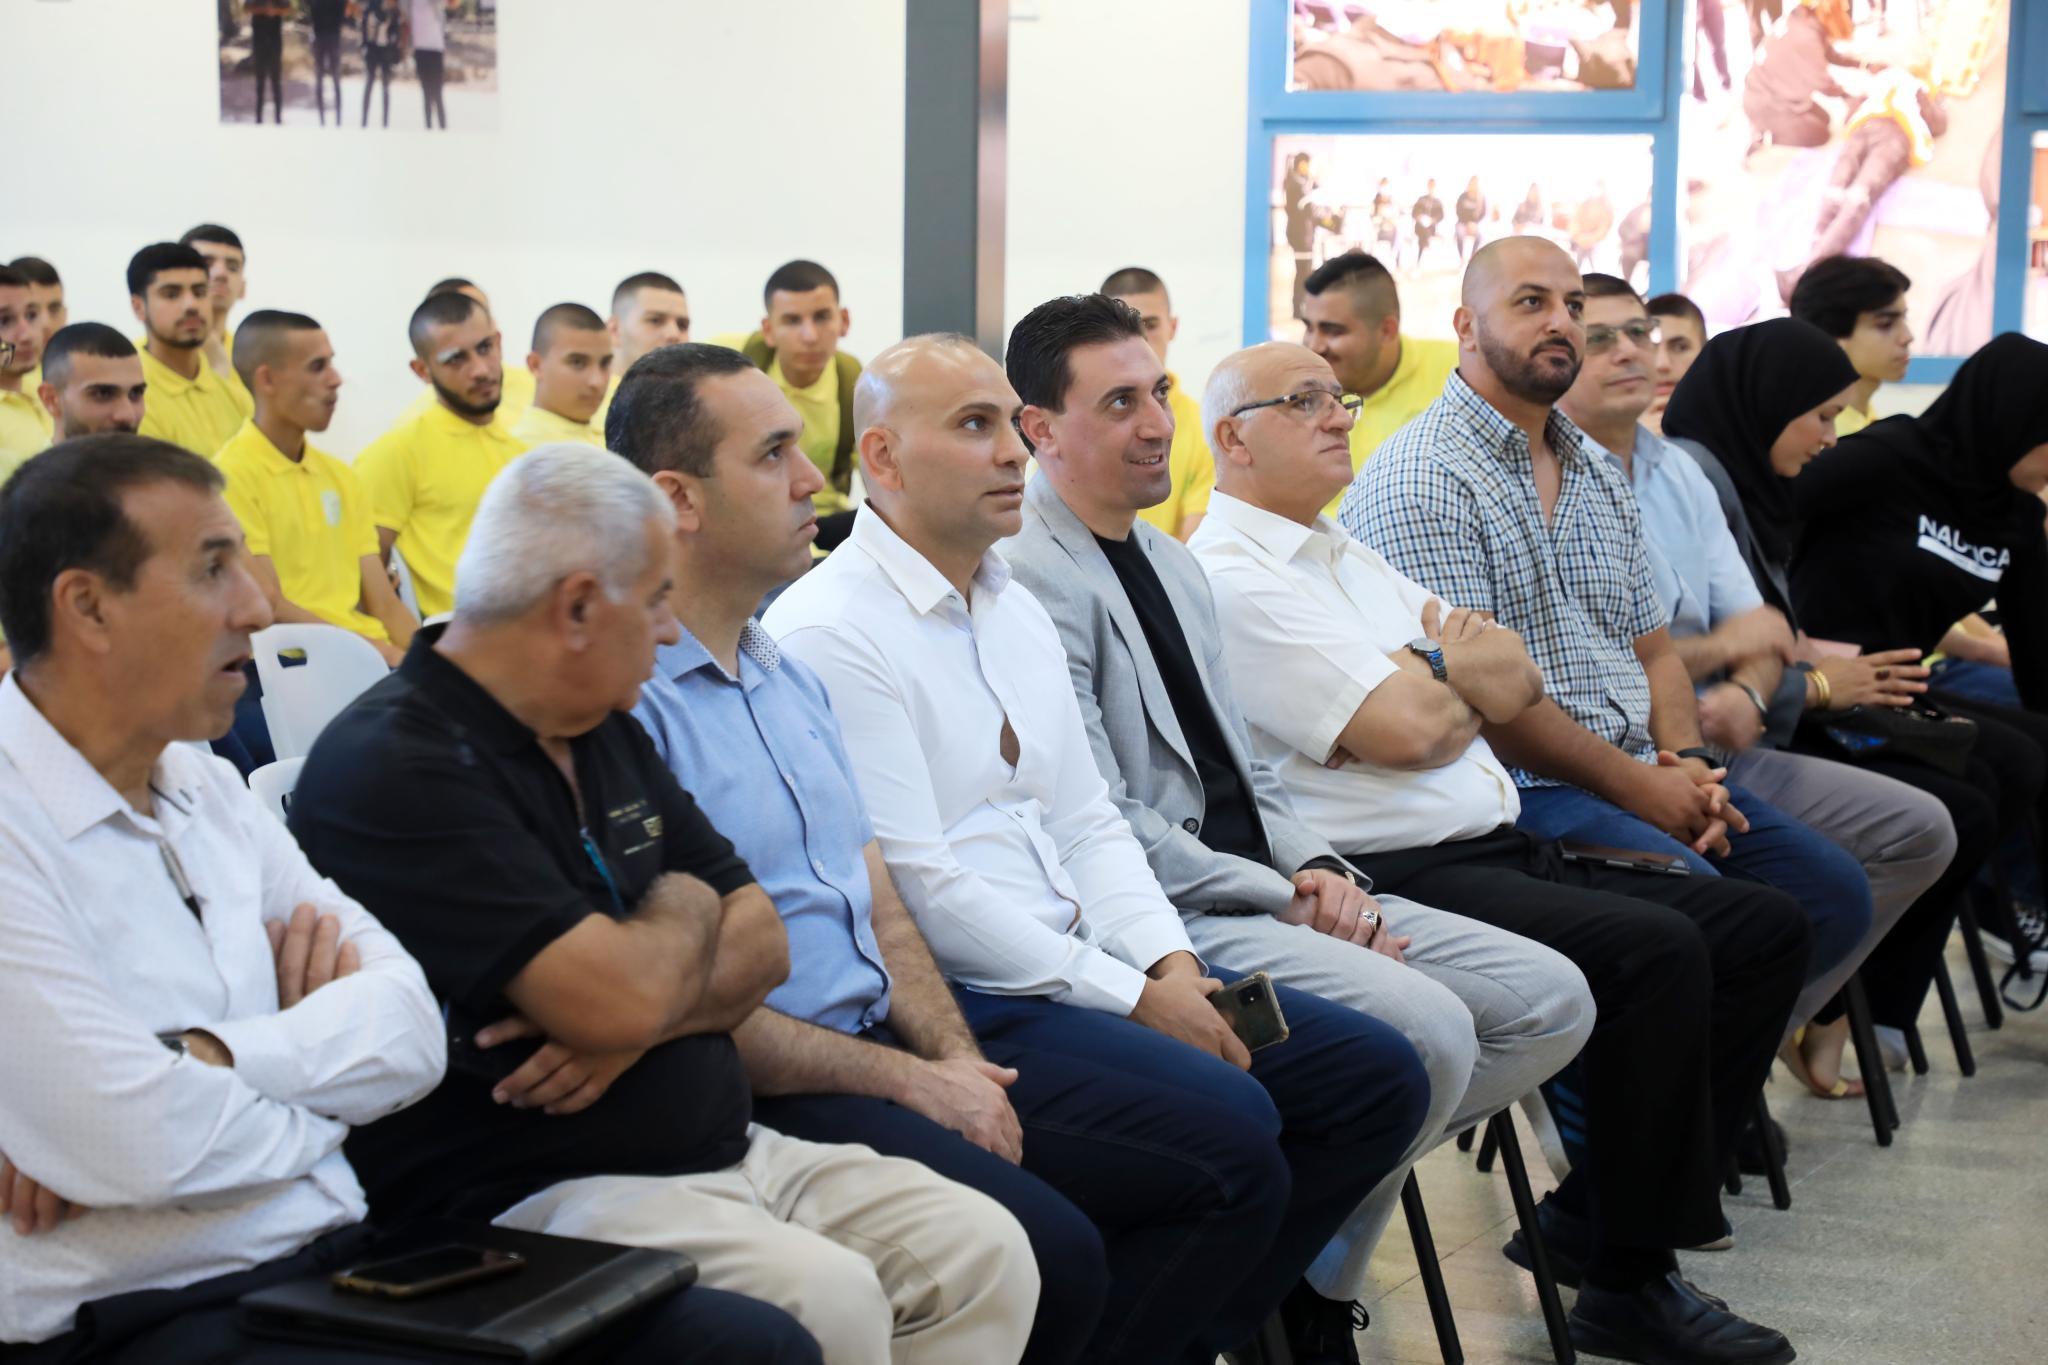 An AAUP Delegation Visits the Daburiya Local Council and the Village Comprehensive School in the Occupied Palestinian Territory